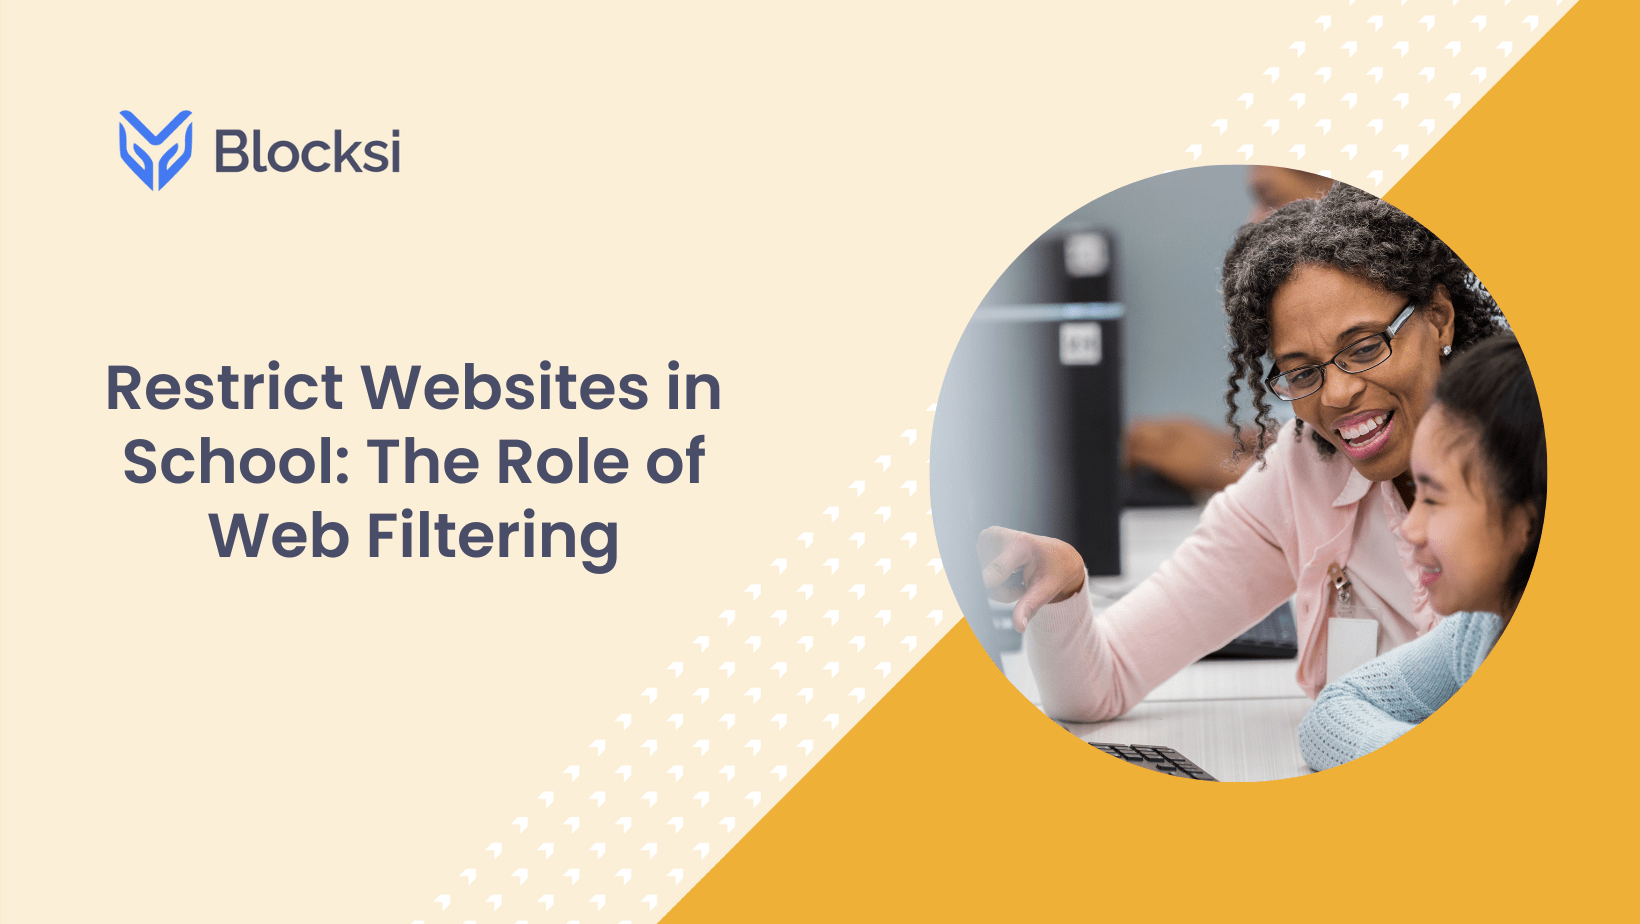 Restrict Websites in School: The Role of Web Filtering